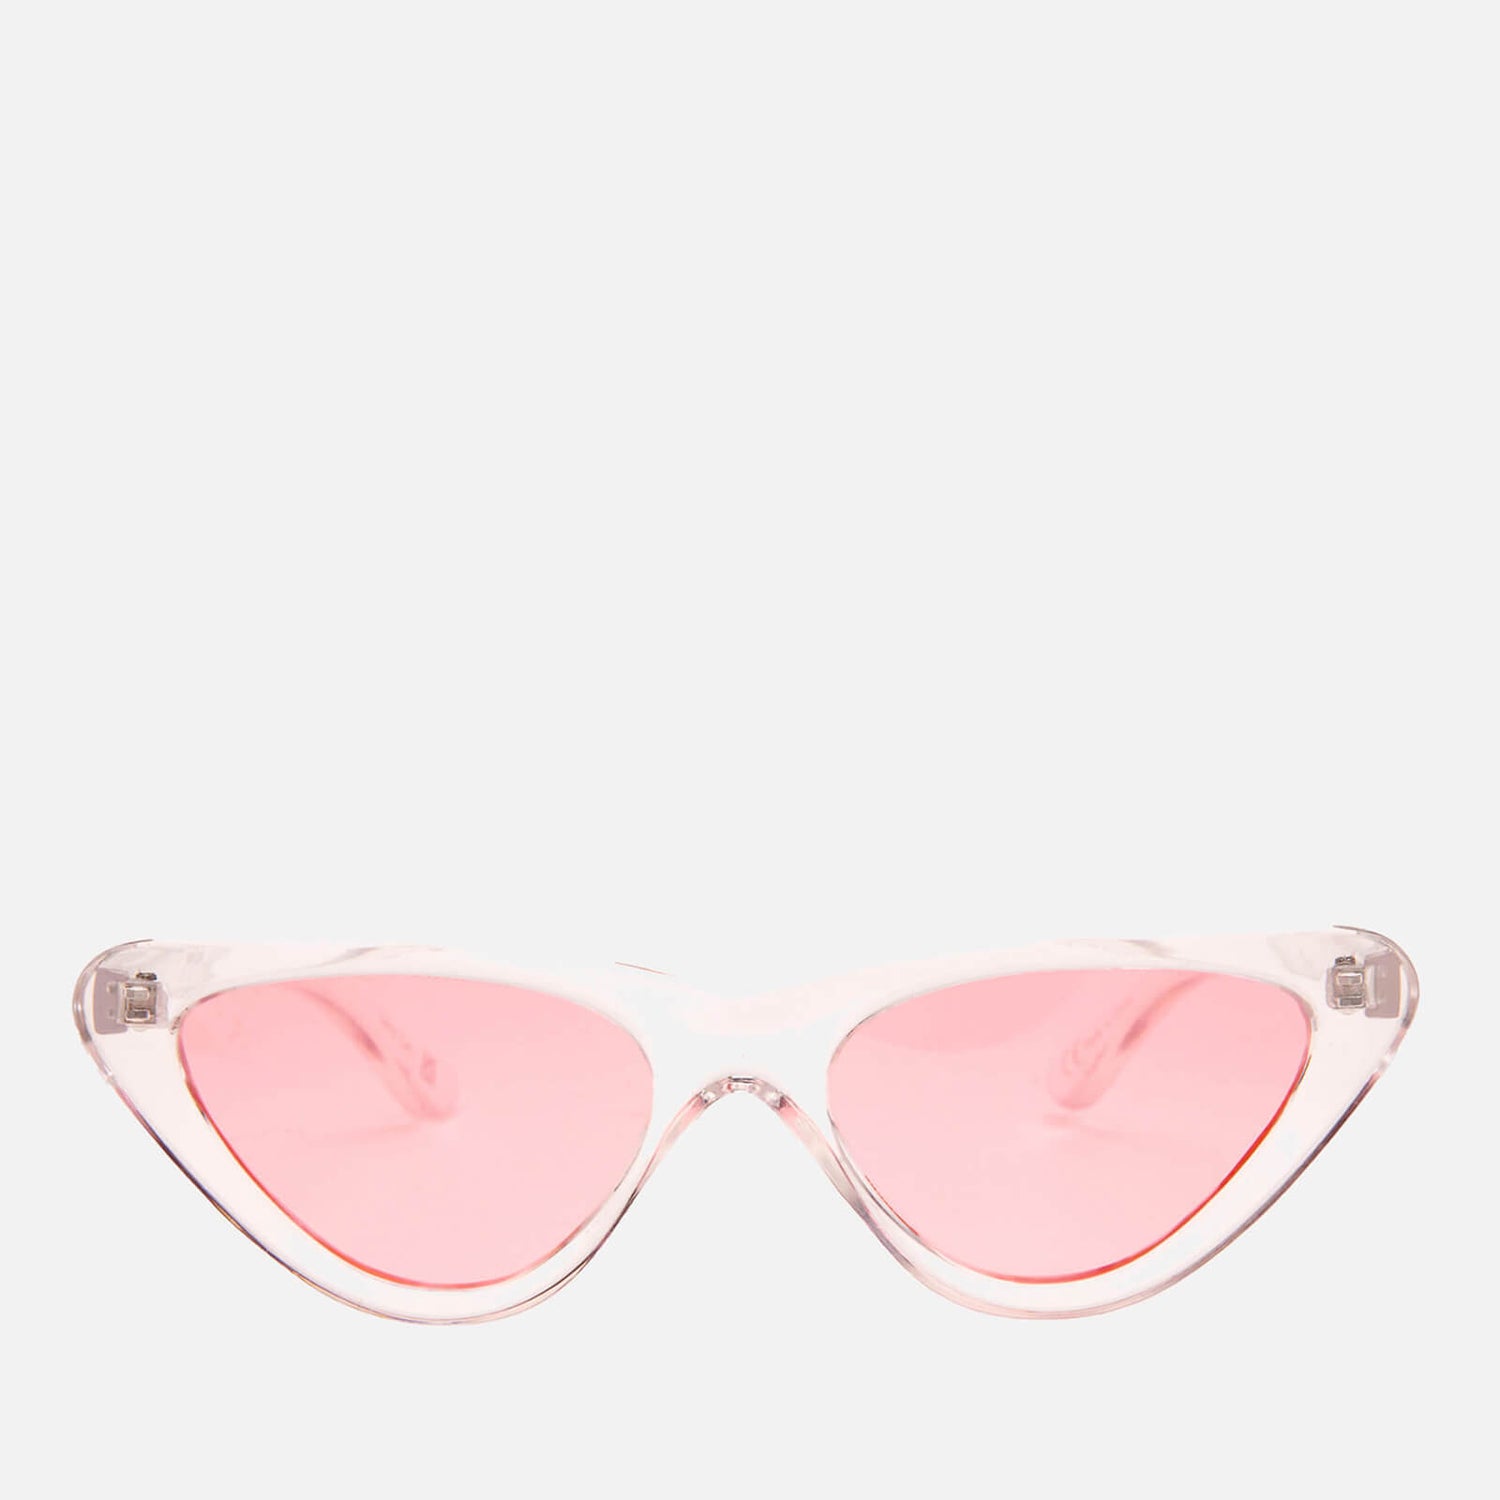 Jeepers Peepers Women's Cat Eye Sunglasses - Clear